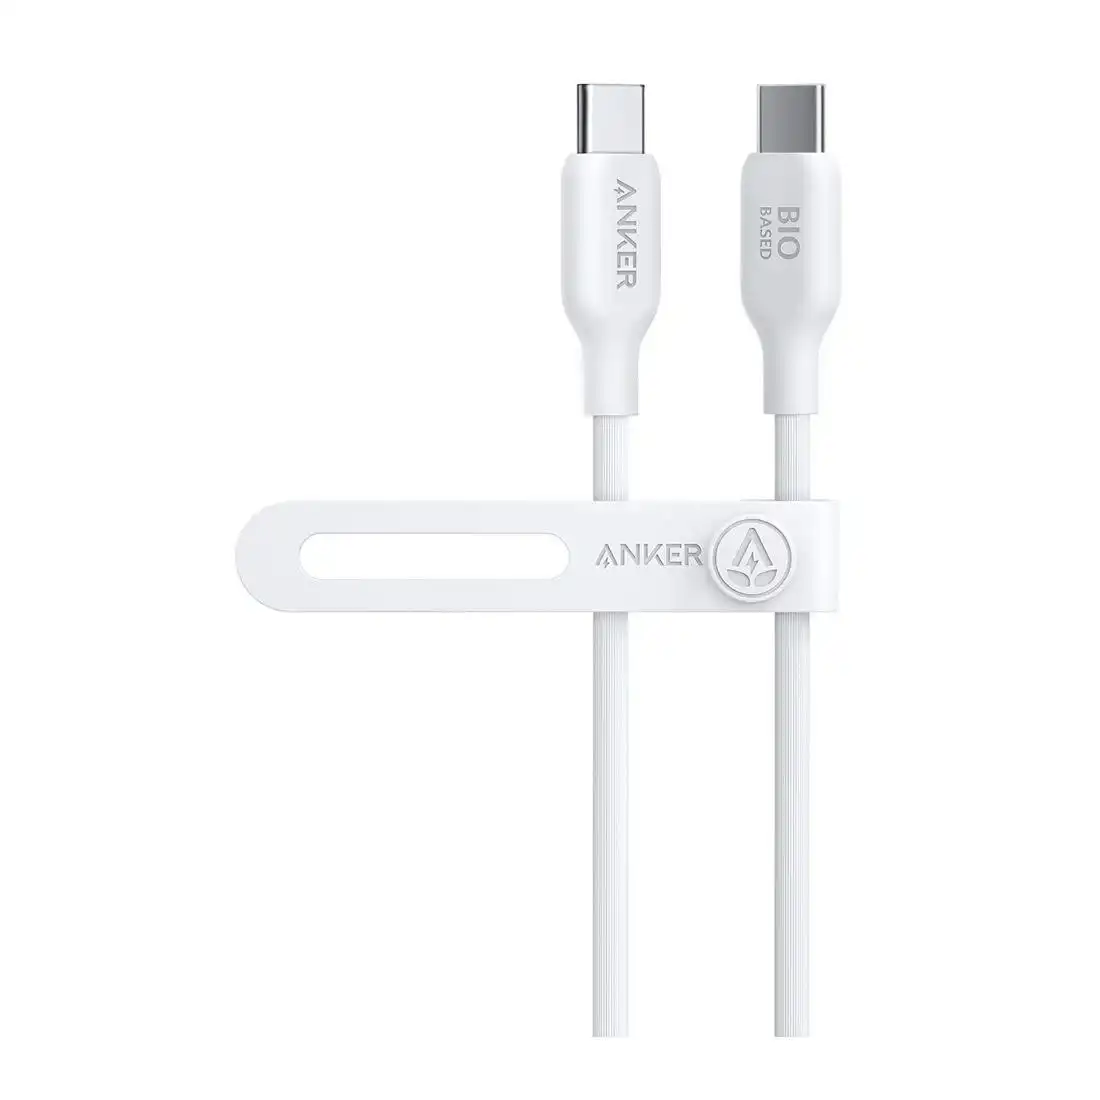 Anker 543 USB-C to USB-C Cable (Bio-Based 3ft) - White